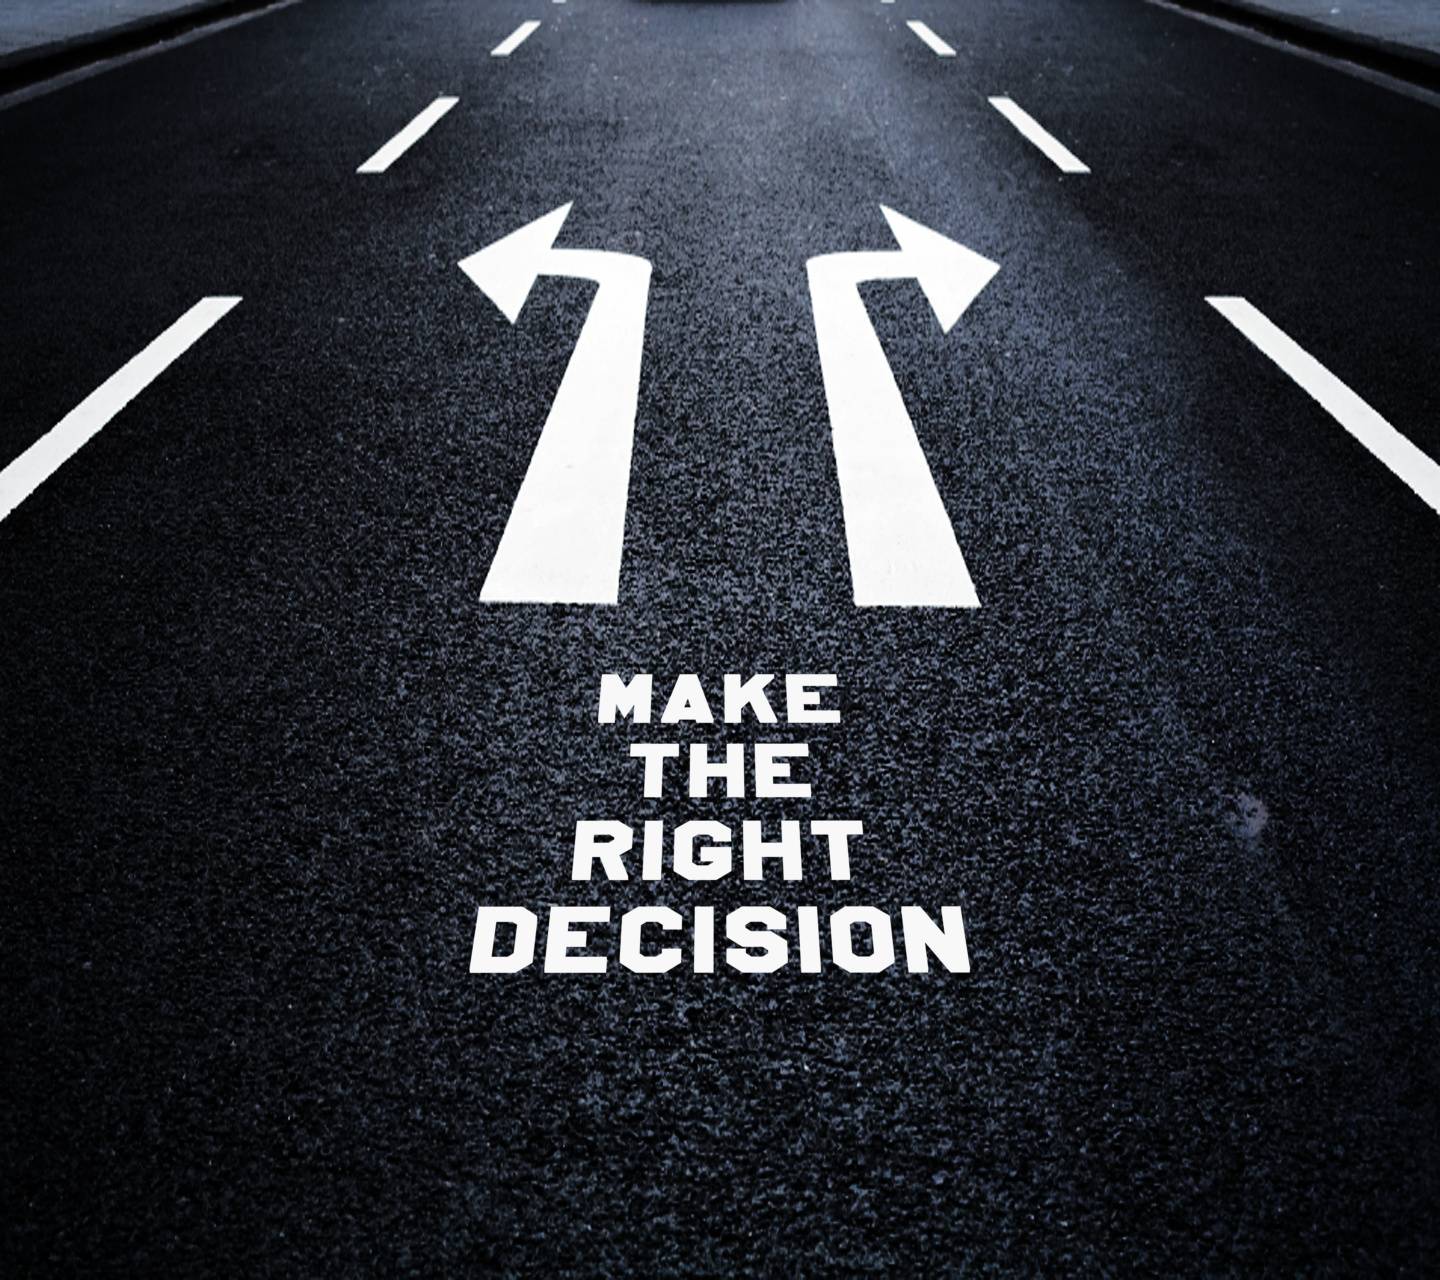 Decisions Wallpaper Free Decisions Background